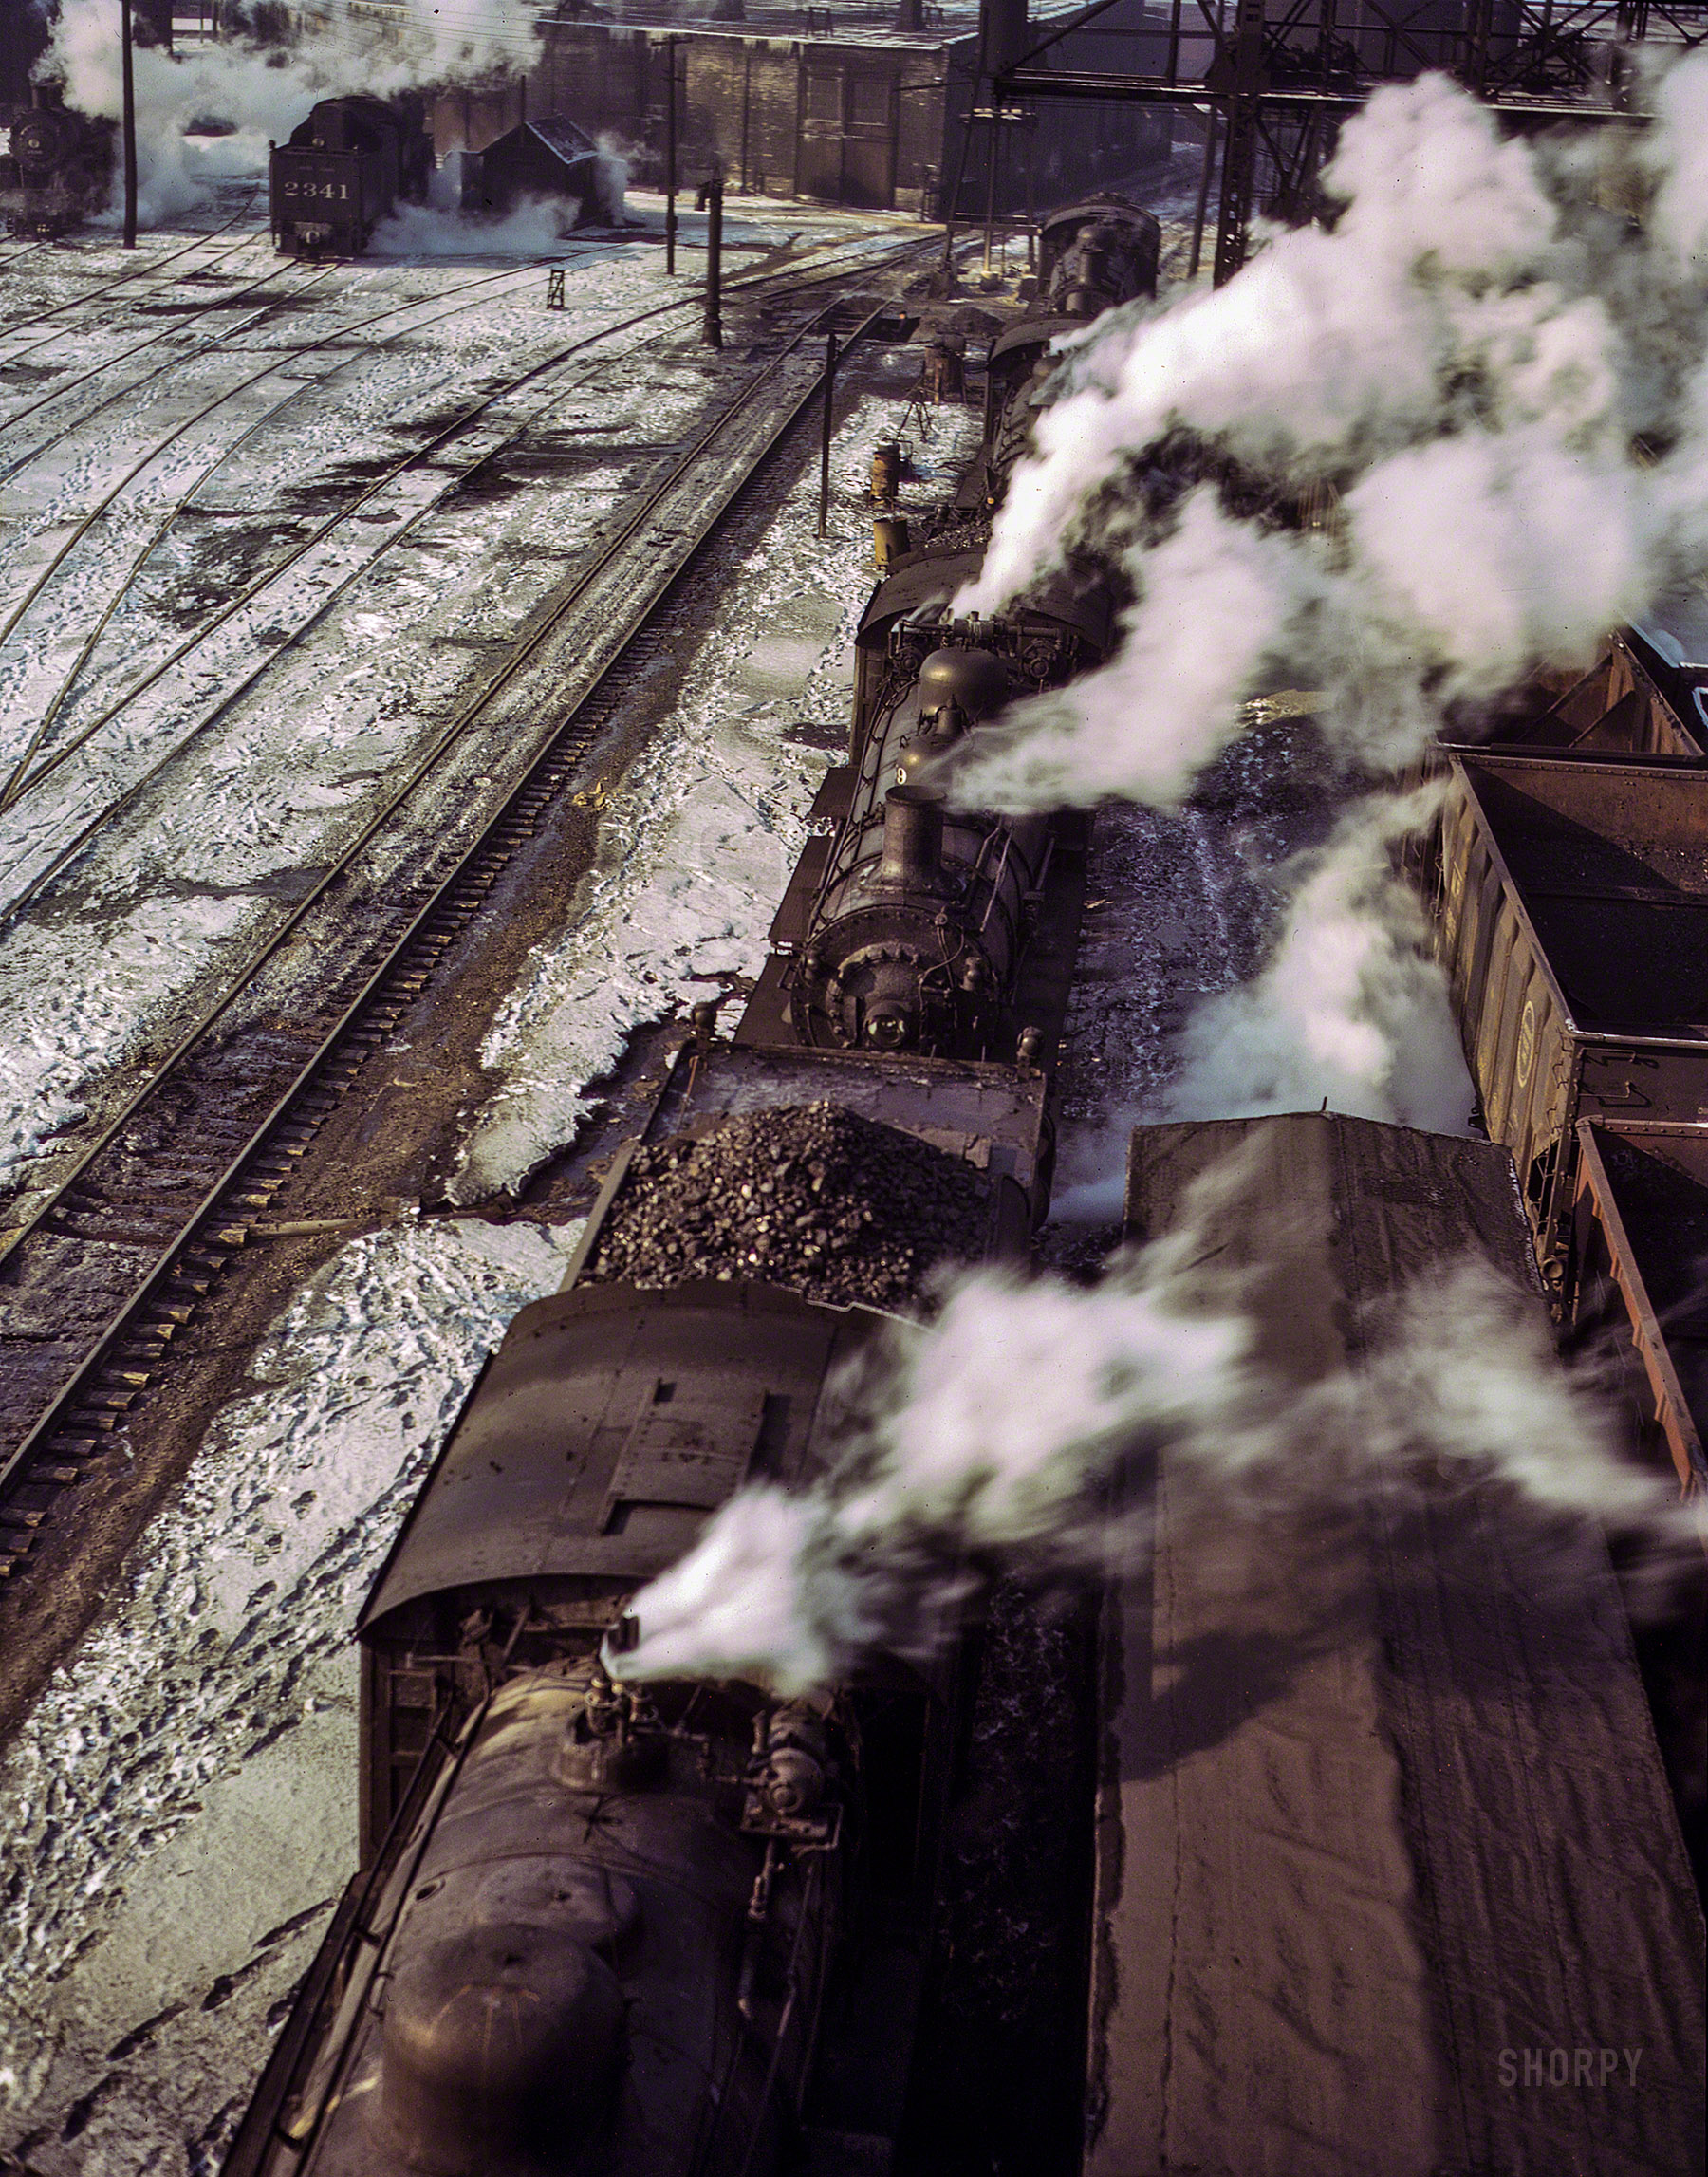 December 1942. Chicago. "Locomotives lined up for coal, sand and water at the coaling station in the 40th Street yard of the Chicago & North Western R.R." Kodachrome transparency by Jack Delano. View full size.